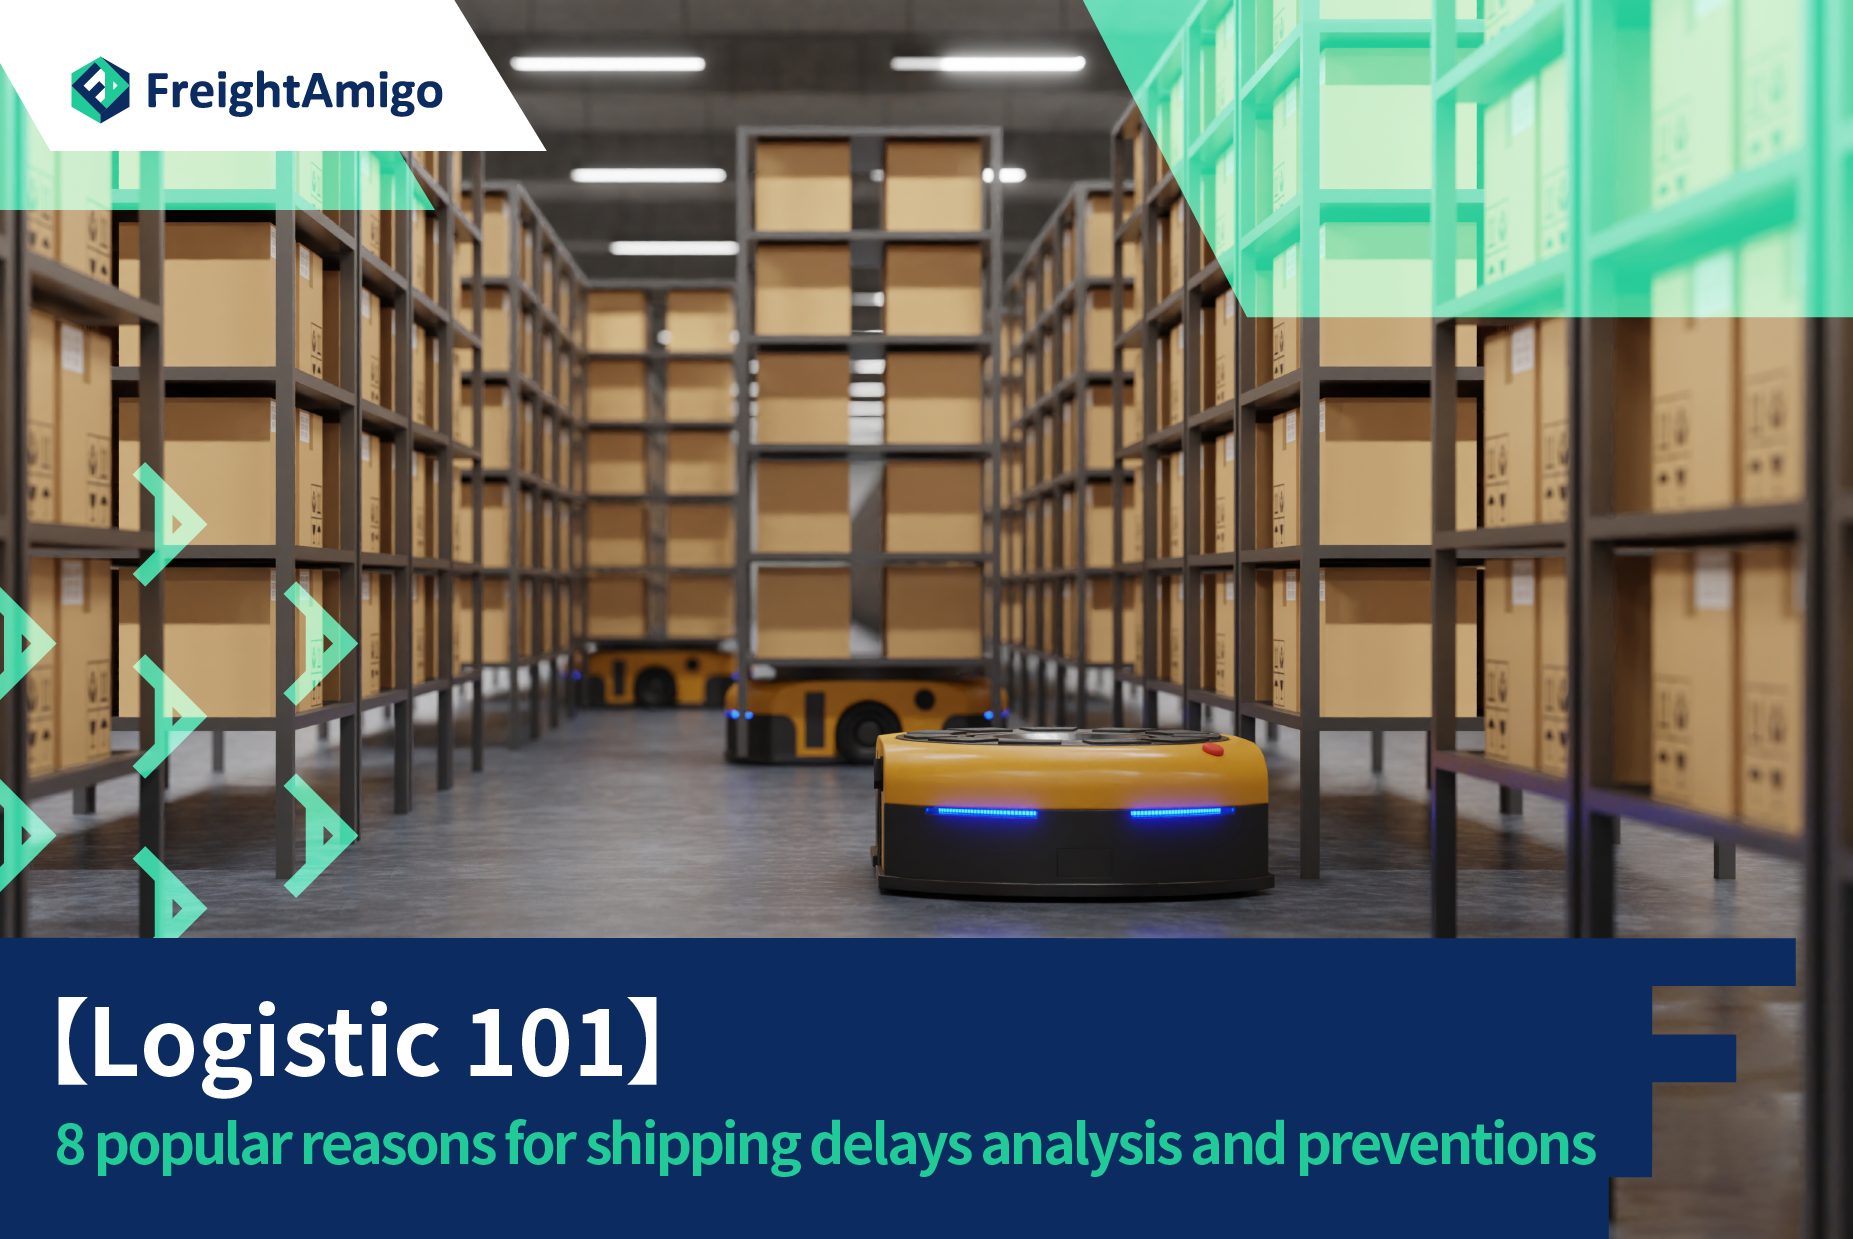 【Logistic 101】8 popular reasons for shipping delays analysis and preventions